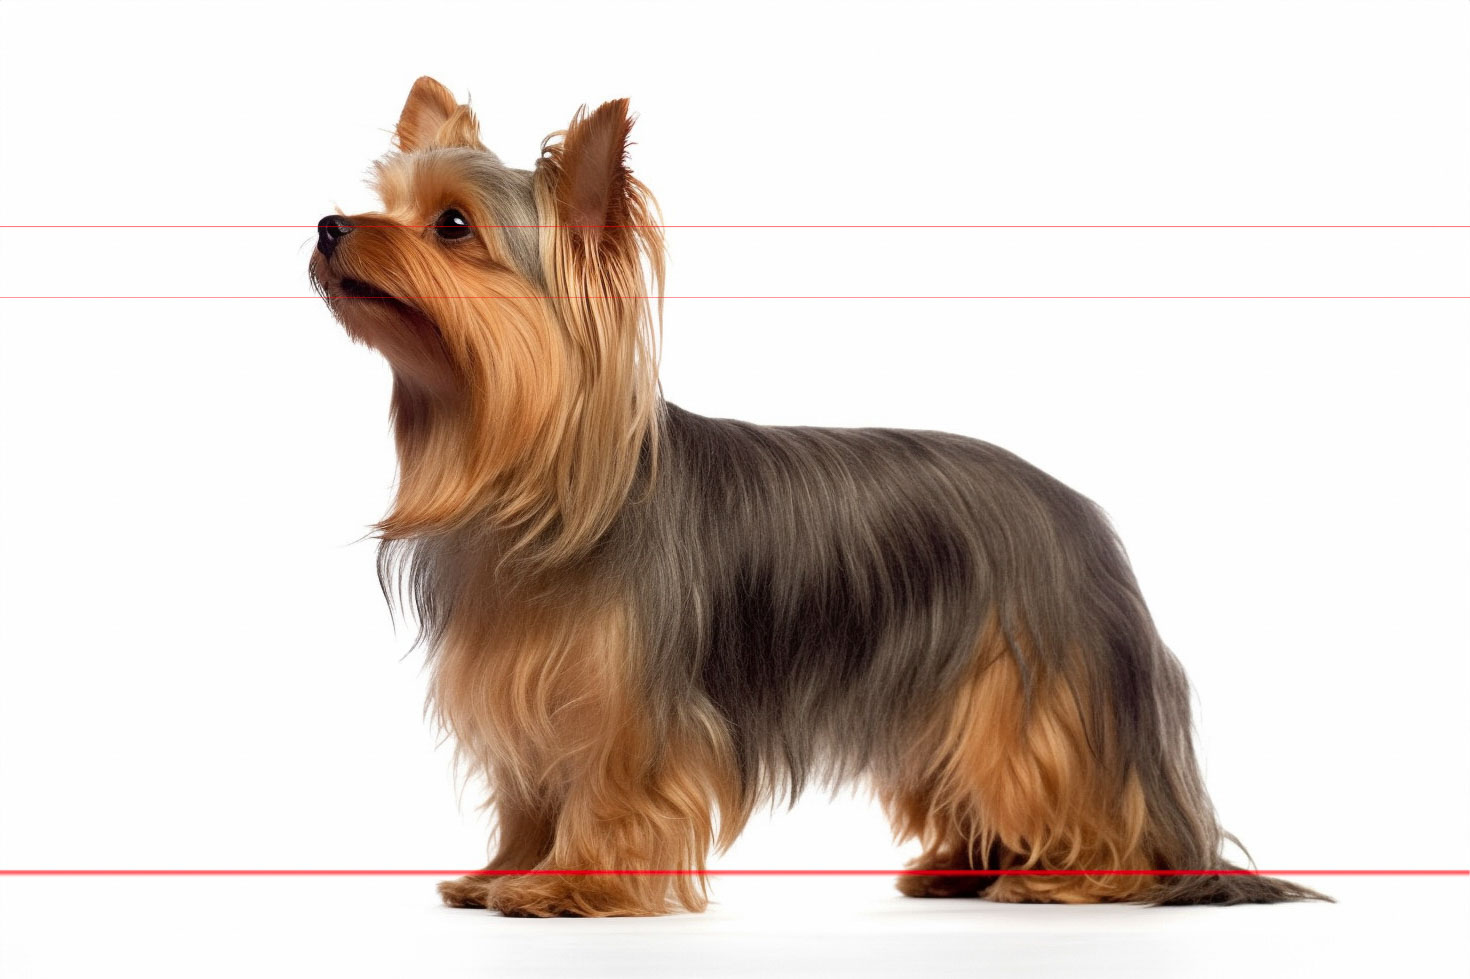 A picture of a Yorkshire Terrier, with a long silky coat of black and tan fur, stands in a confident and alert profile against a white background. The dog's ears are pricked up, and its fur showcasies the breed's characteristic long, flowing hair.